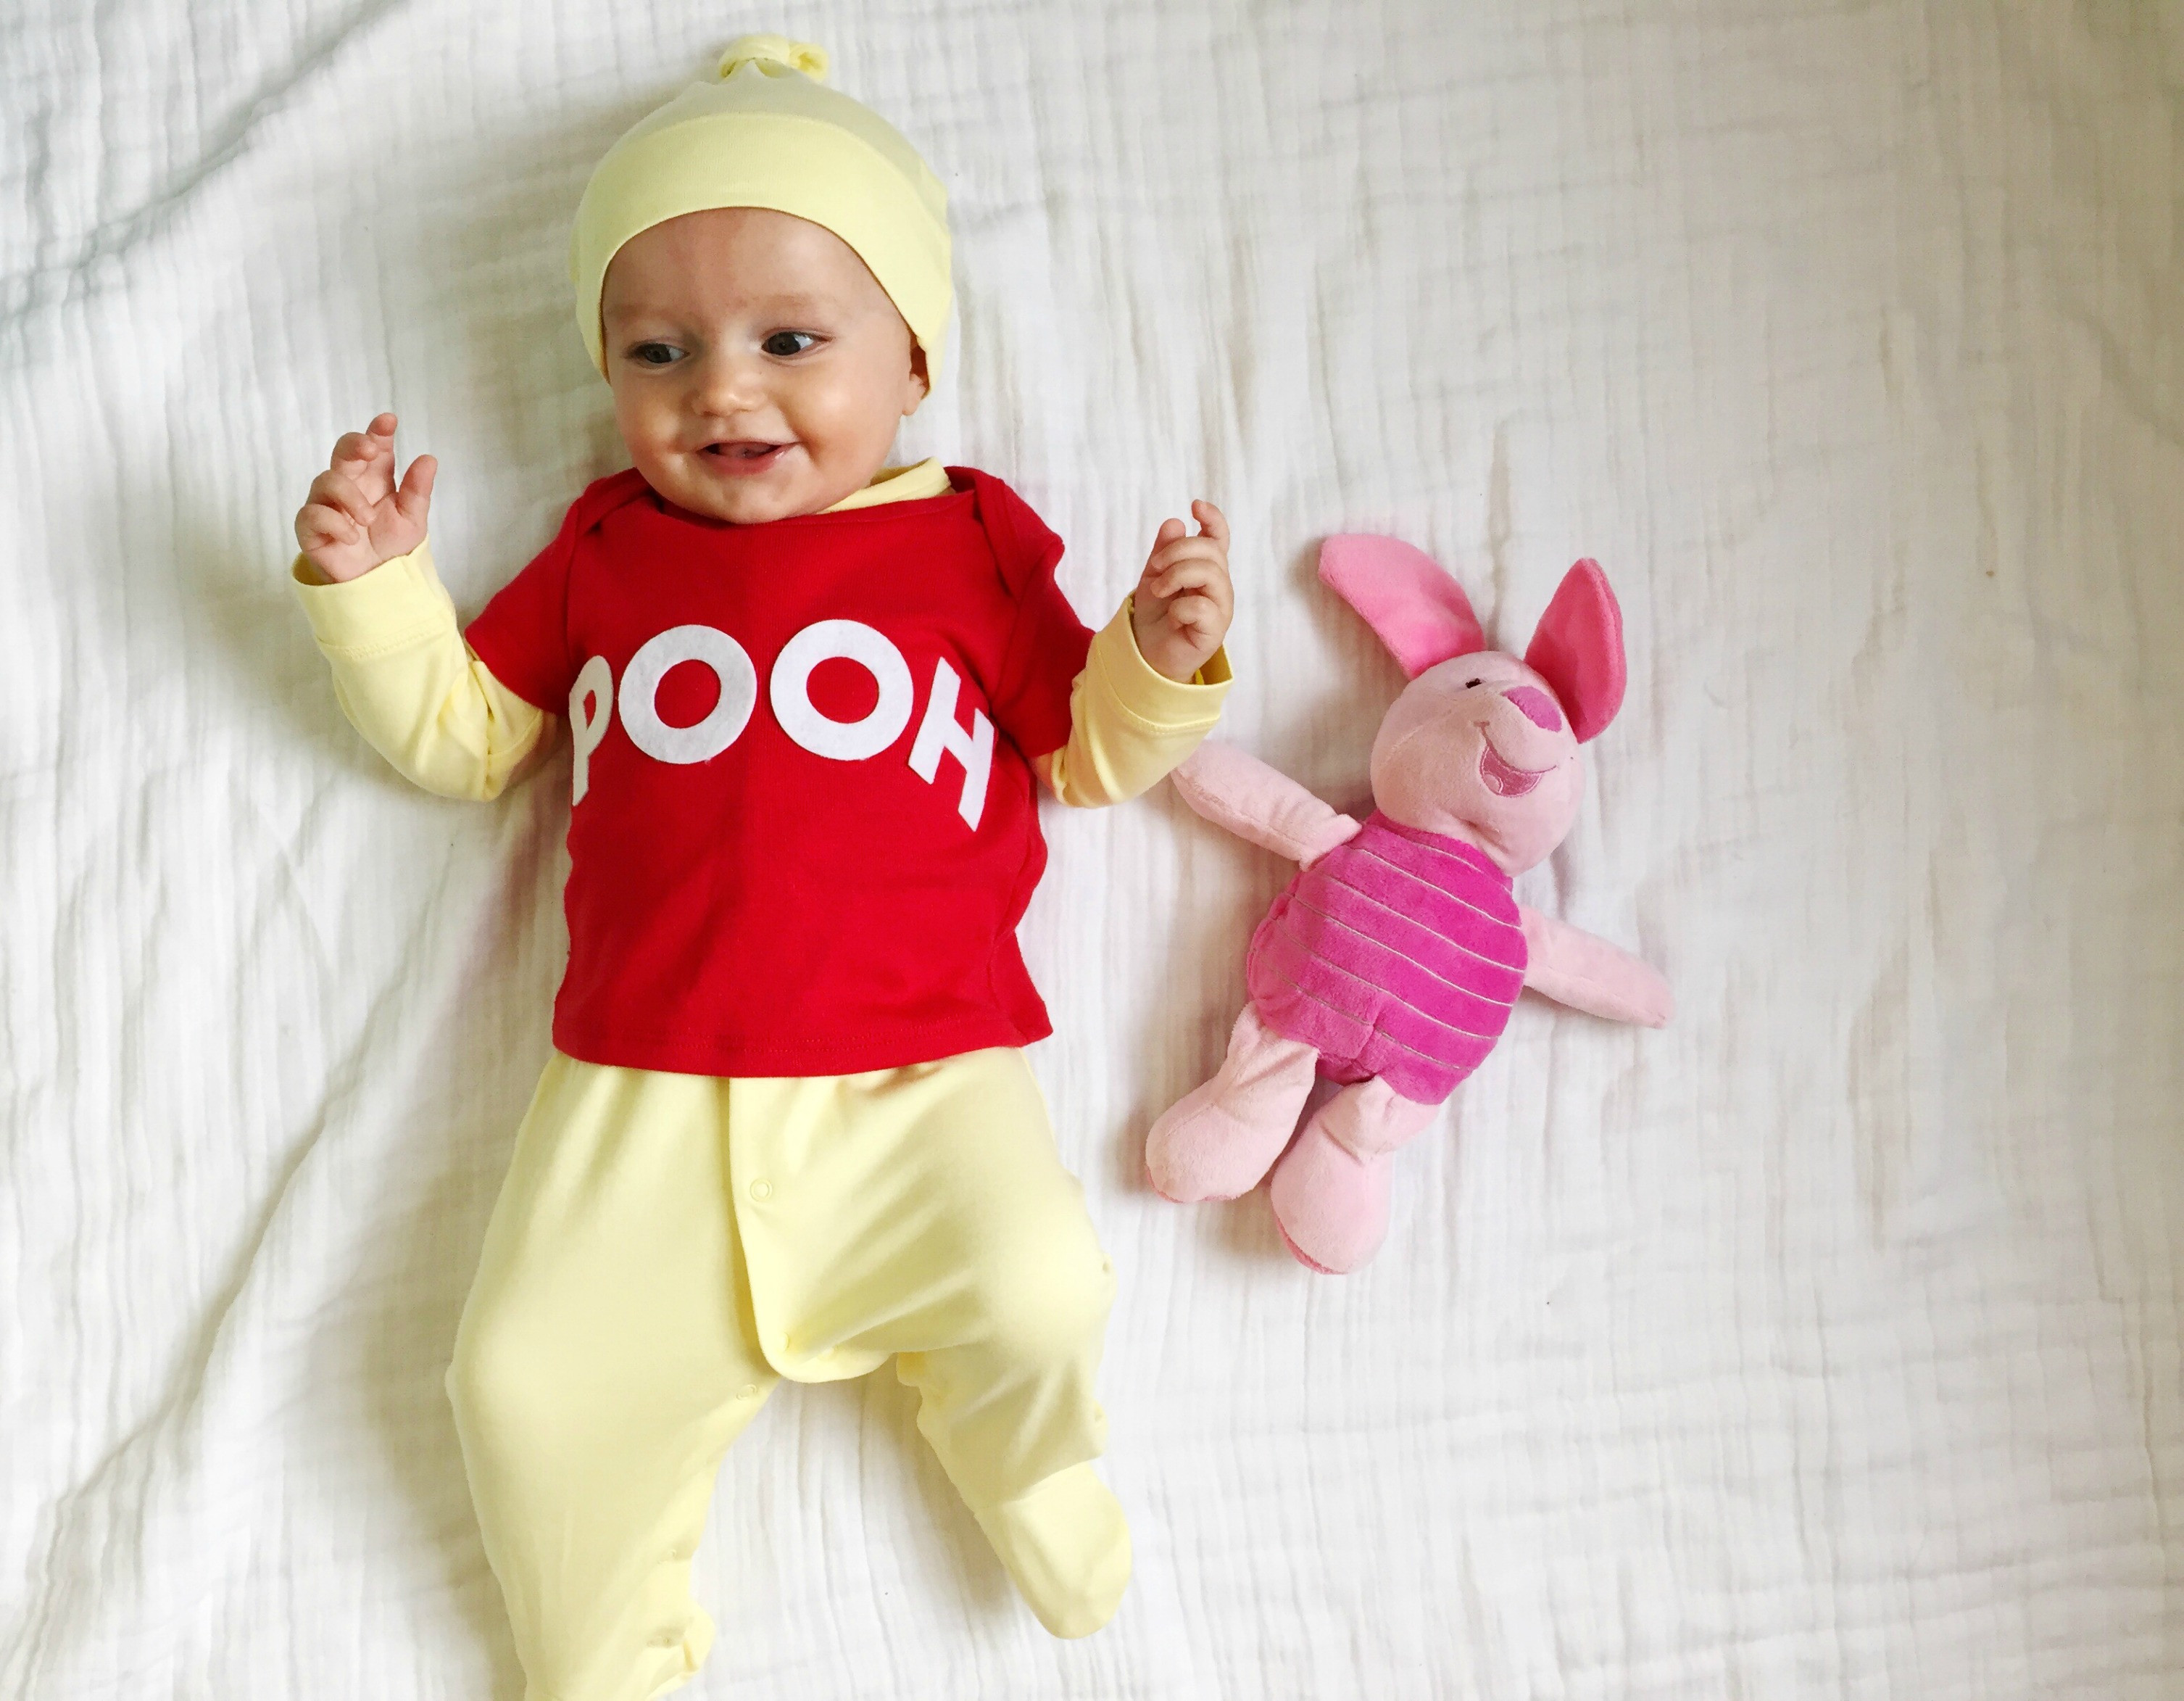 DIY Baby Costumes
 5 Easy DIY Halloween Costumes for Baby The Chirping Moms